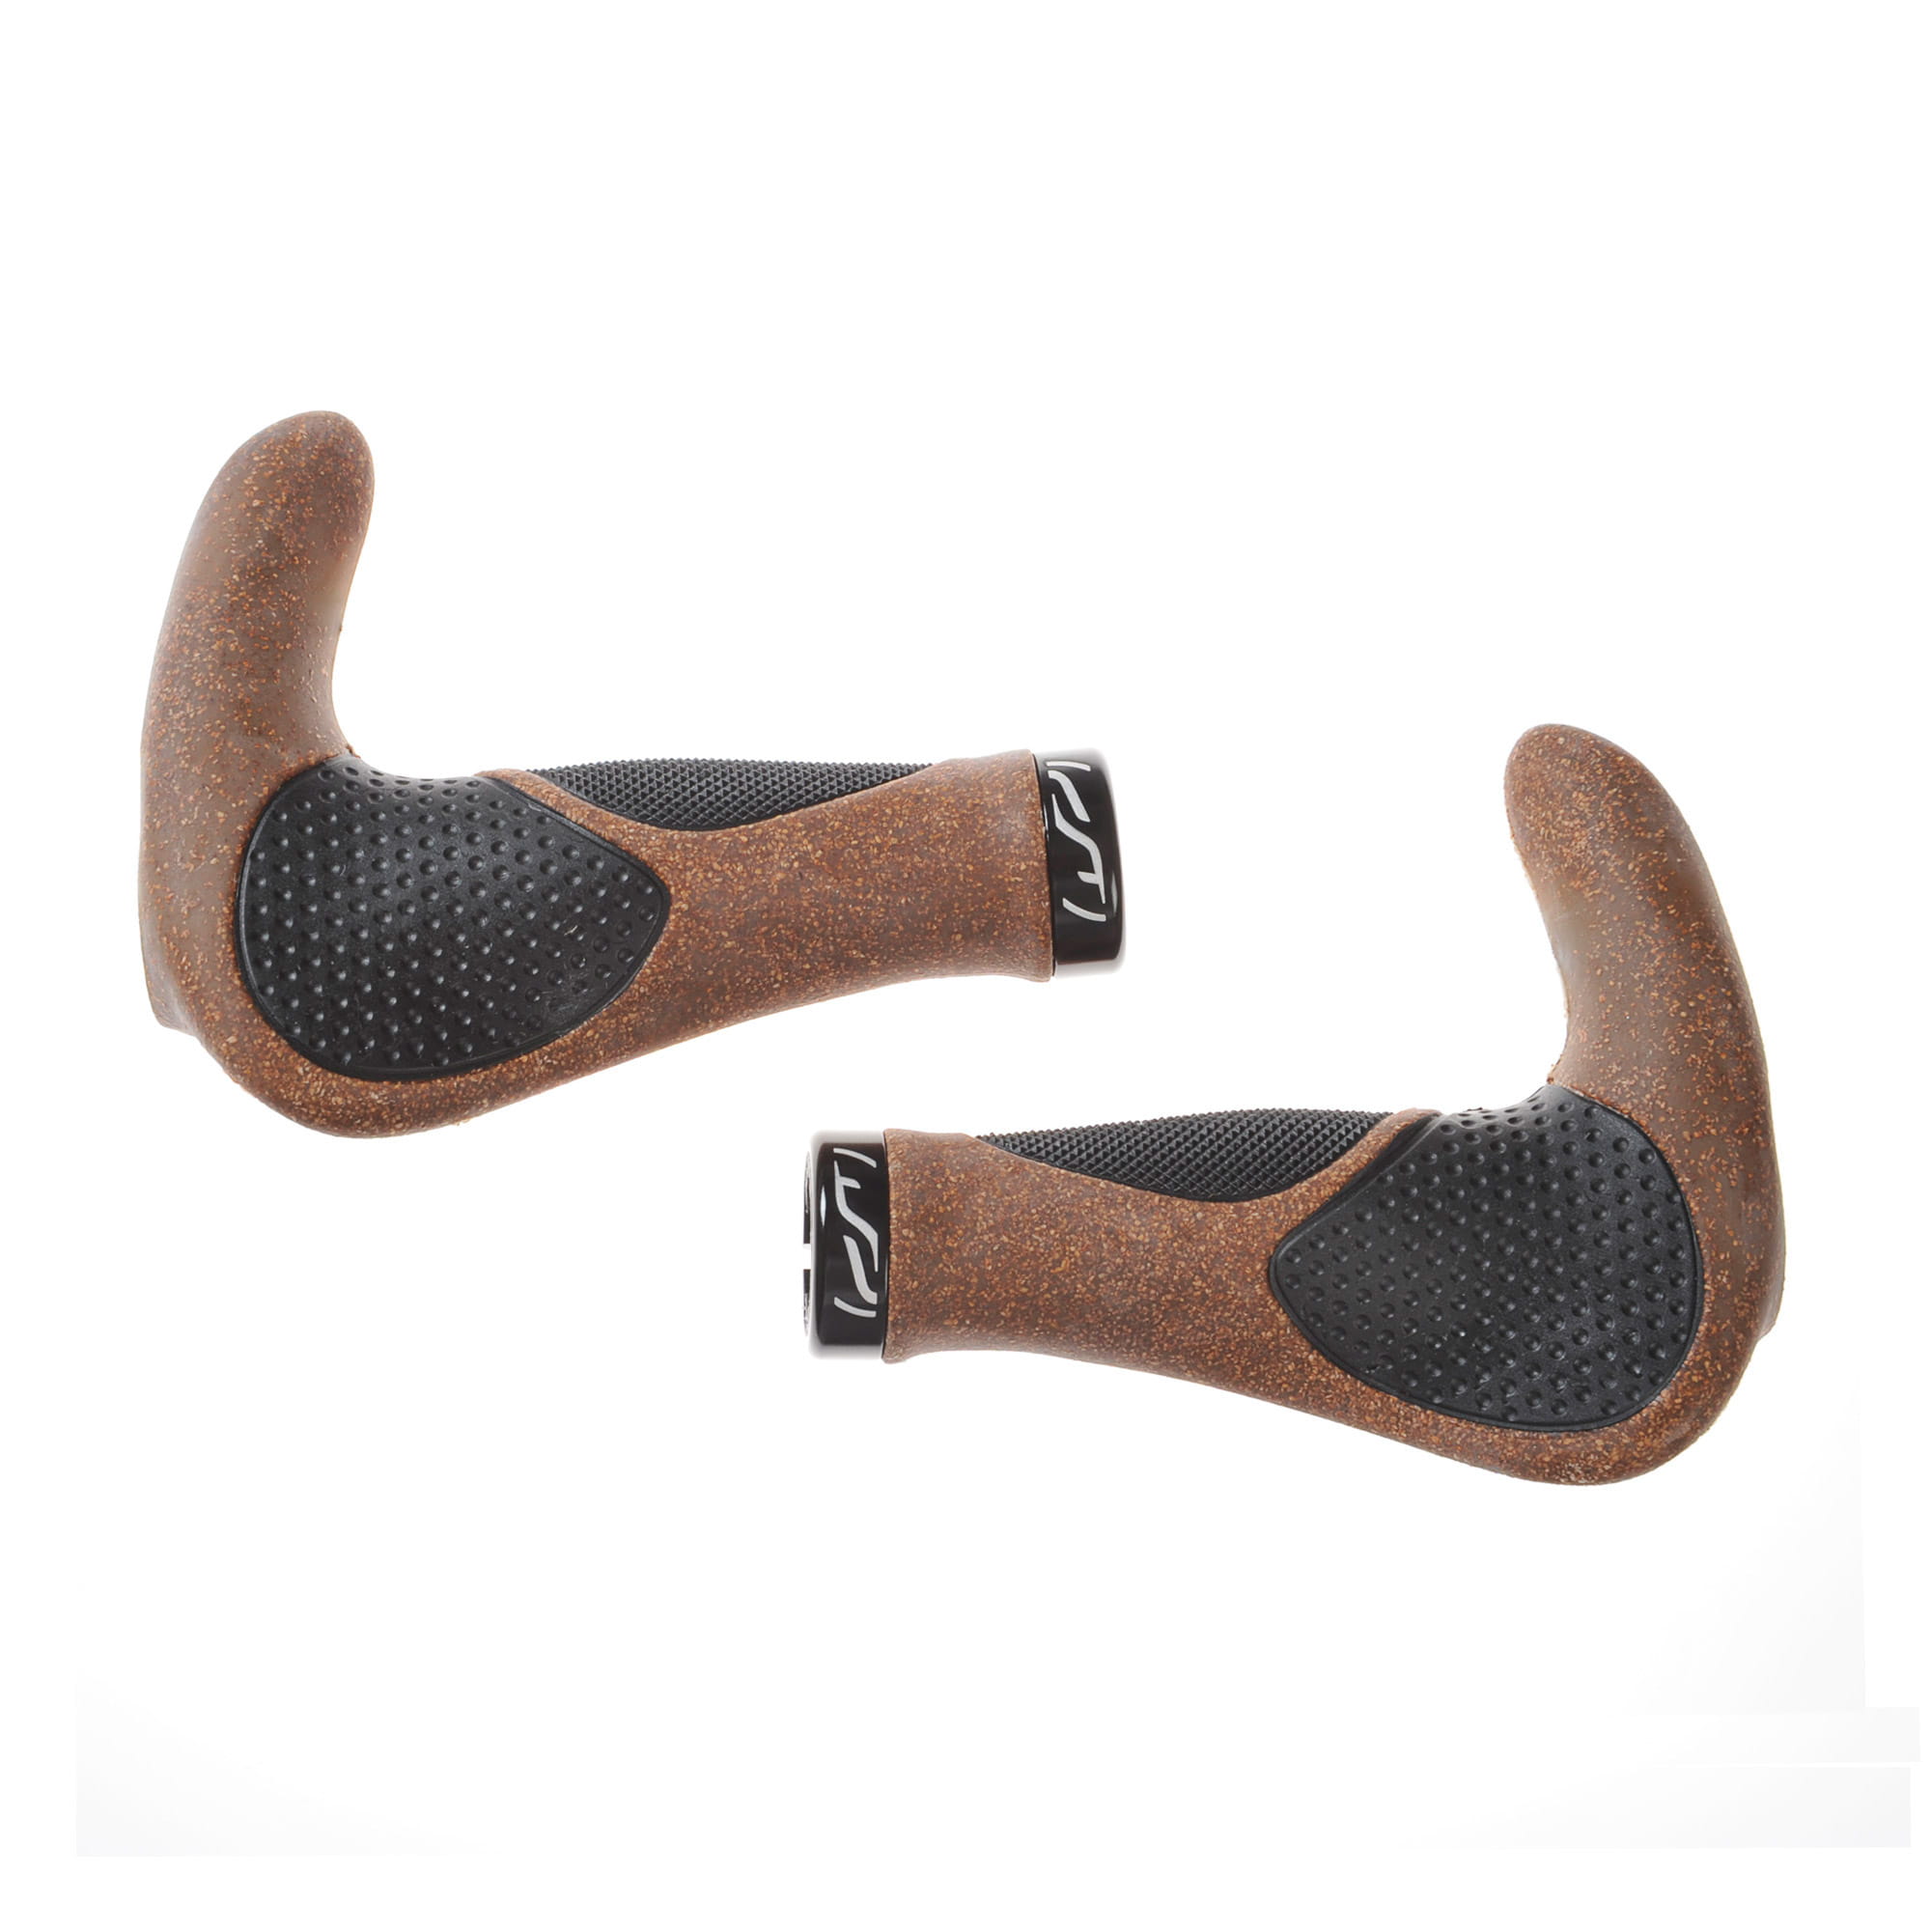 Contec Tour Deluxe Pro Kork Bike Grips with BarEnds 140 mm